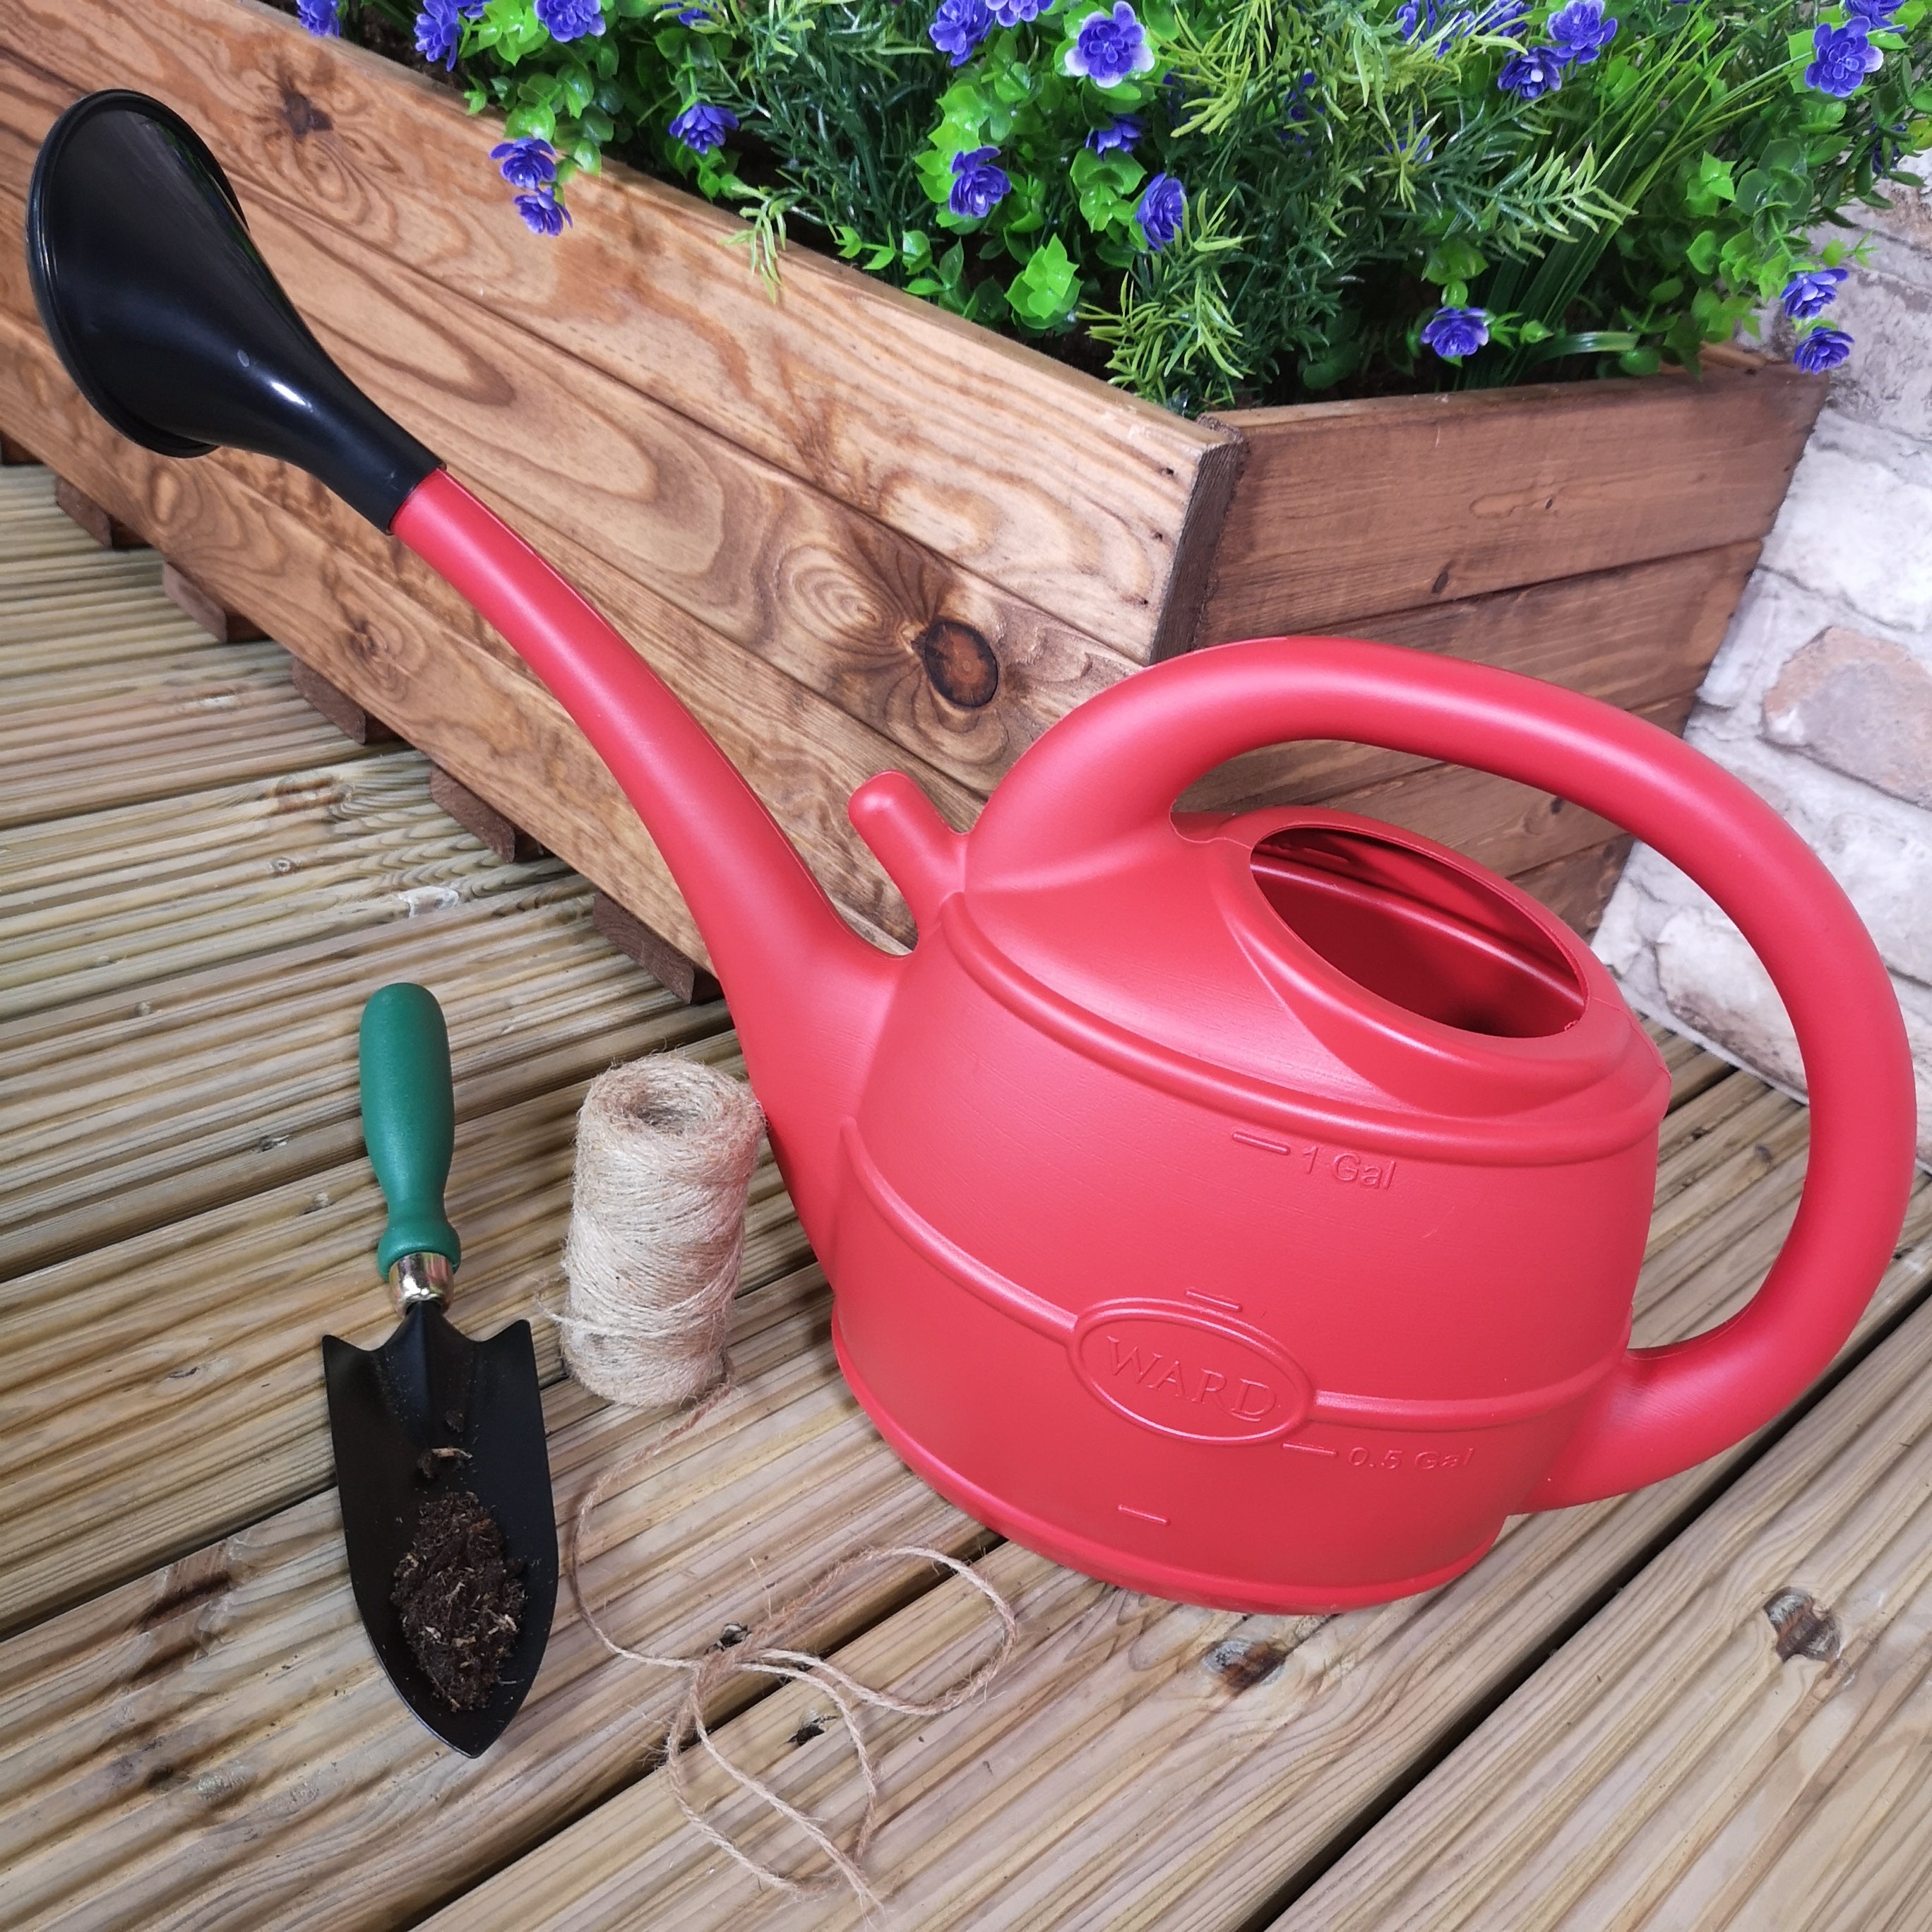 5L Ward Garden Watering Can with Rose - Red